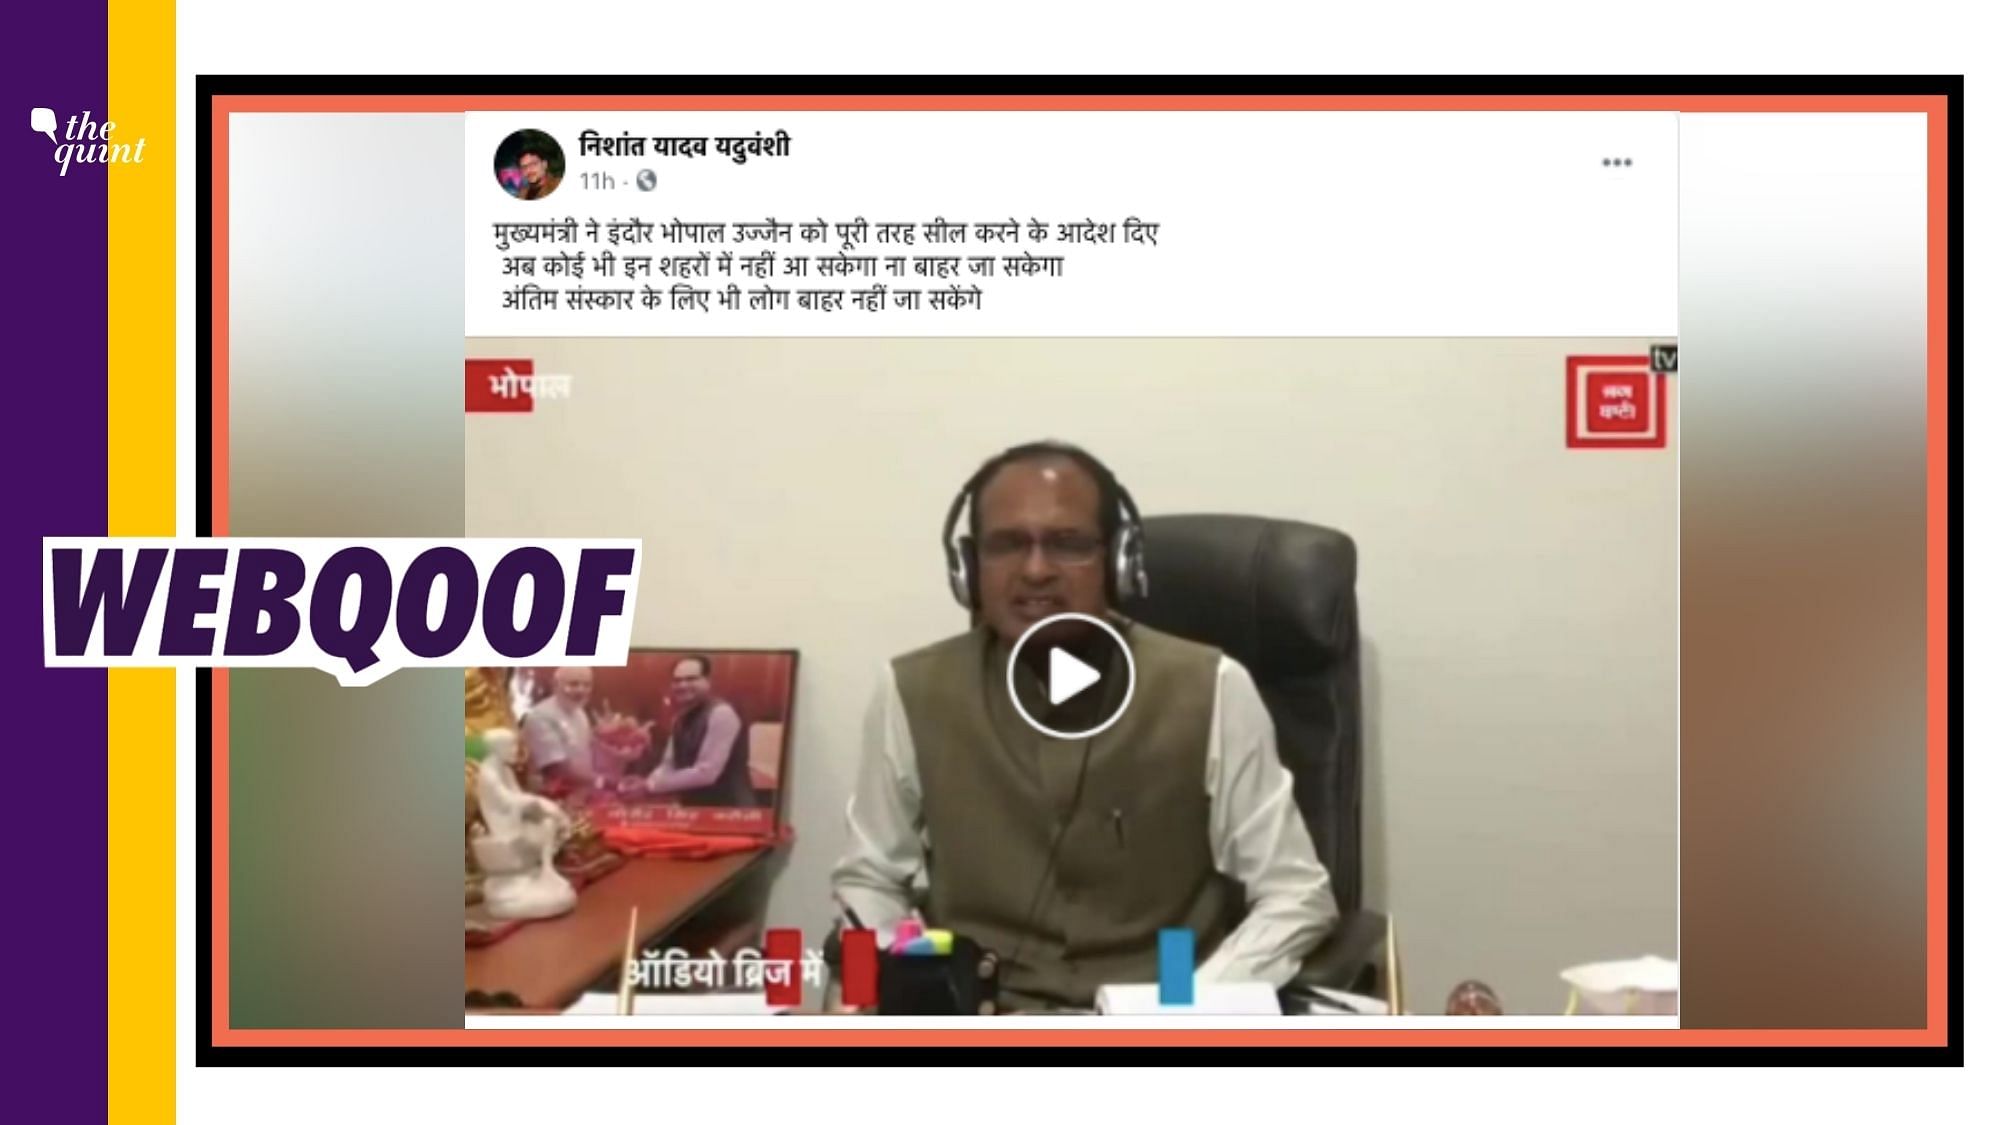 A clip of MP Chief Minister Shivraj Singh Chouhan saying that the state government has decided to completely seal Indore and Bhopal is doing the rounds on social media.